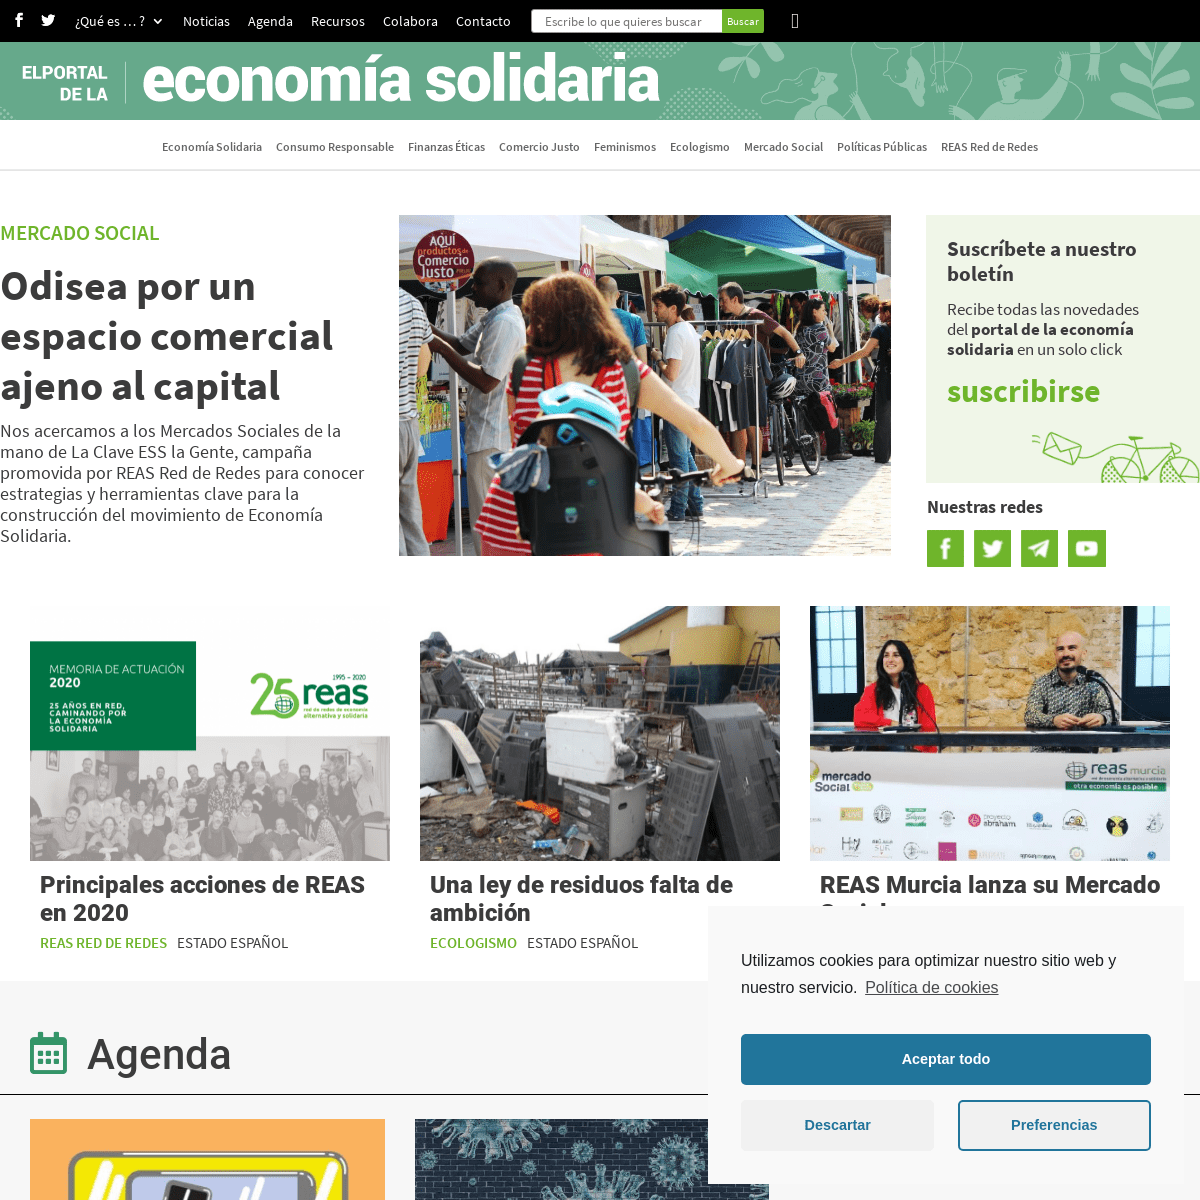 A complete backup of https://economiasolidaria.org